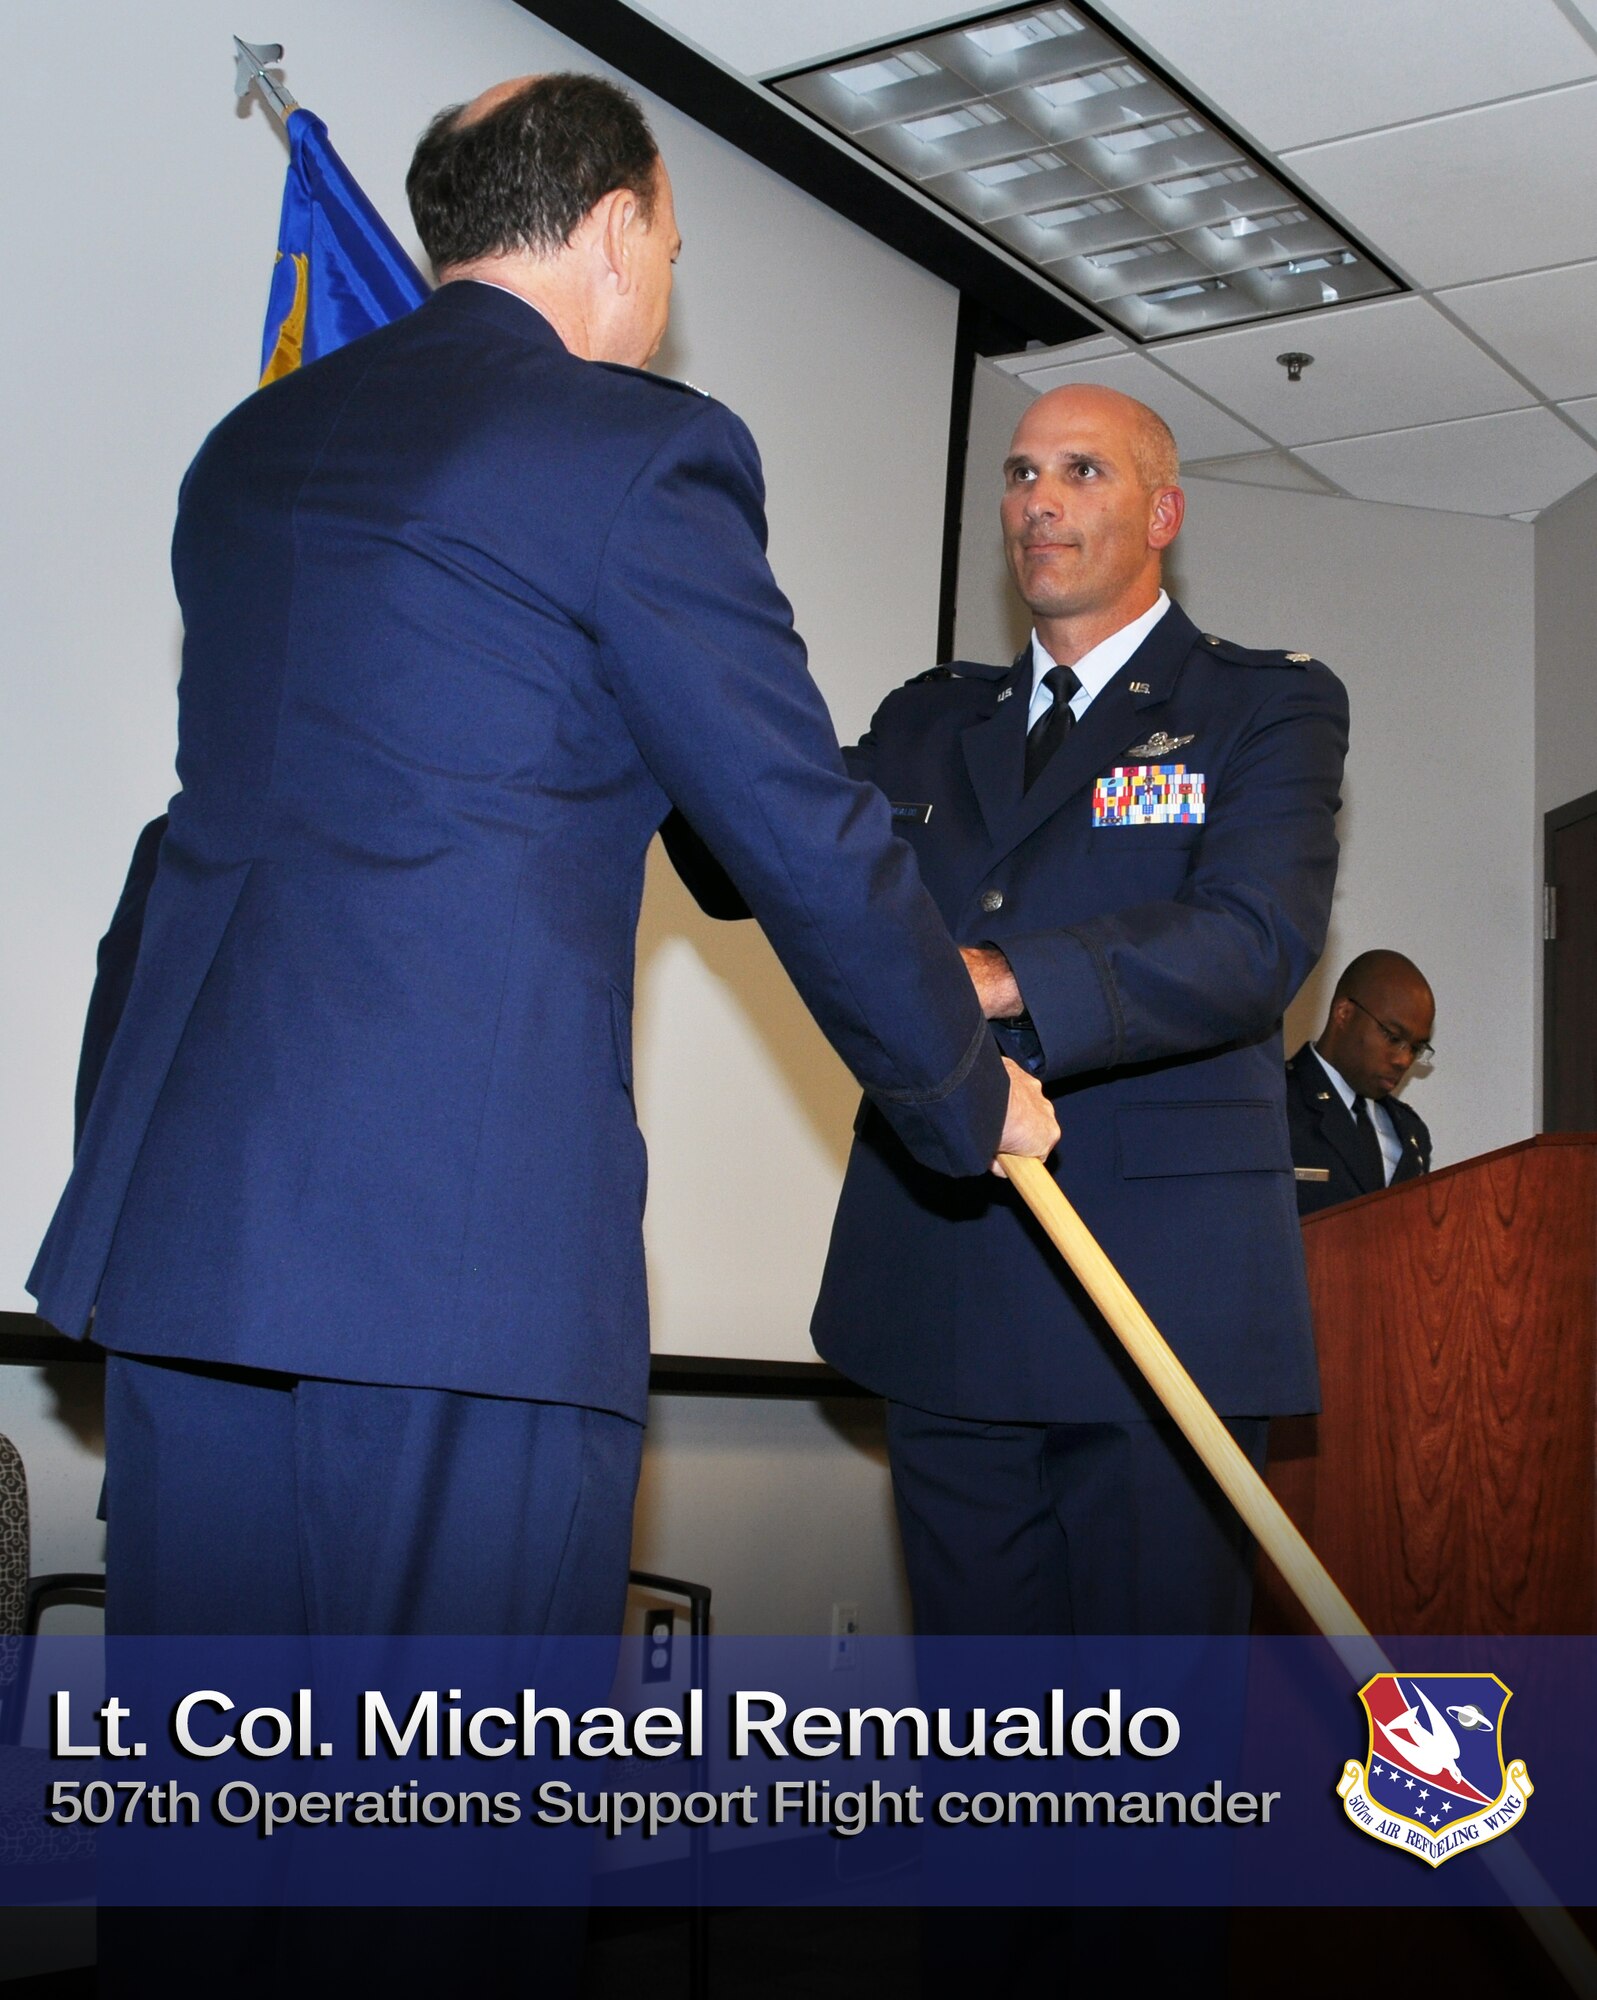 Lt. Col. Michael Remualdo assumes command of the 507th Operations Support Flight during a ceremony July 13, 2013.  (U.S. Air Force photo/Lt. Col. Kim Howerton)